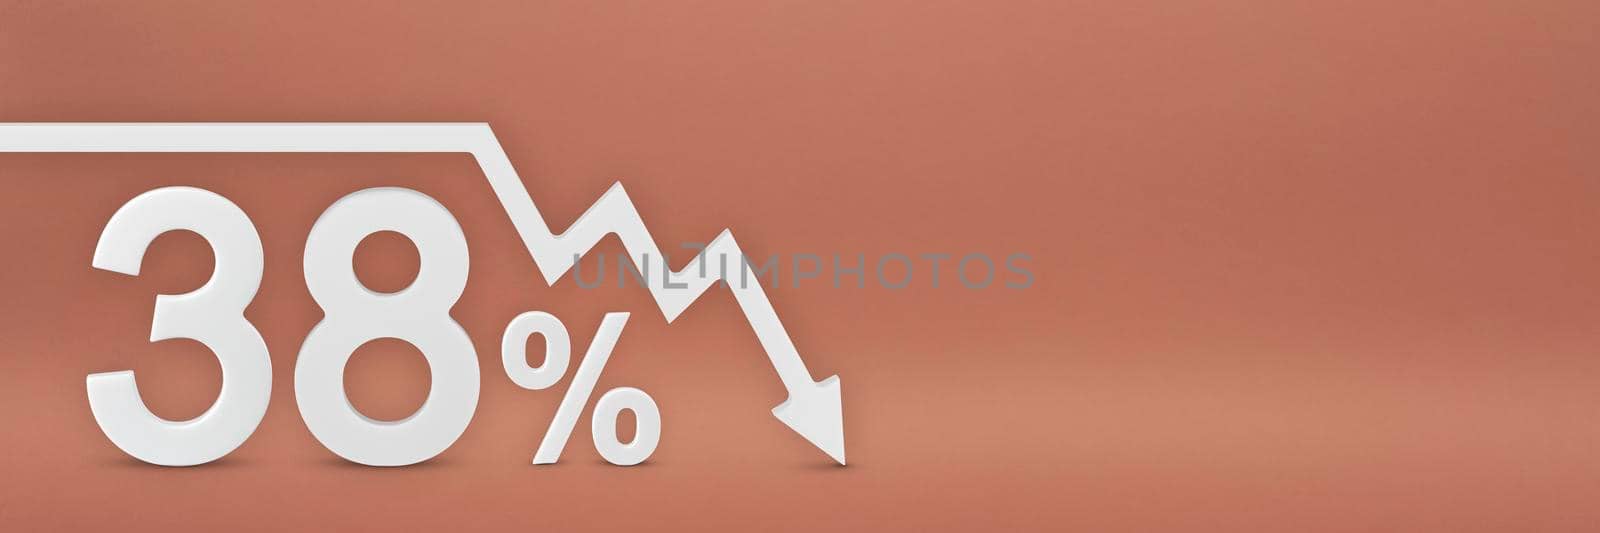 thirty-eight percent, the arrow on the graph is pointing down. Stock market crash, bear market, inflation.Economic collapse, collapse of stocks.3d banner,38 percent discount sign on a red background